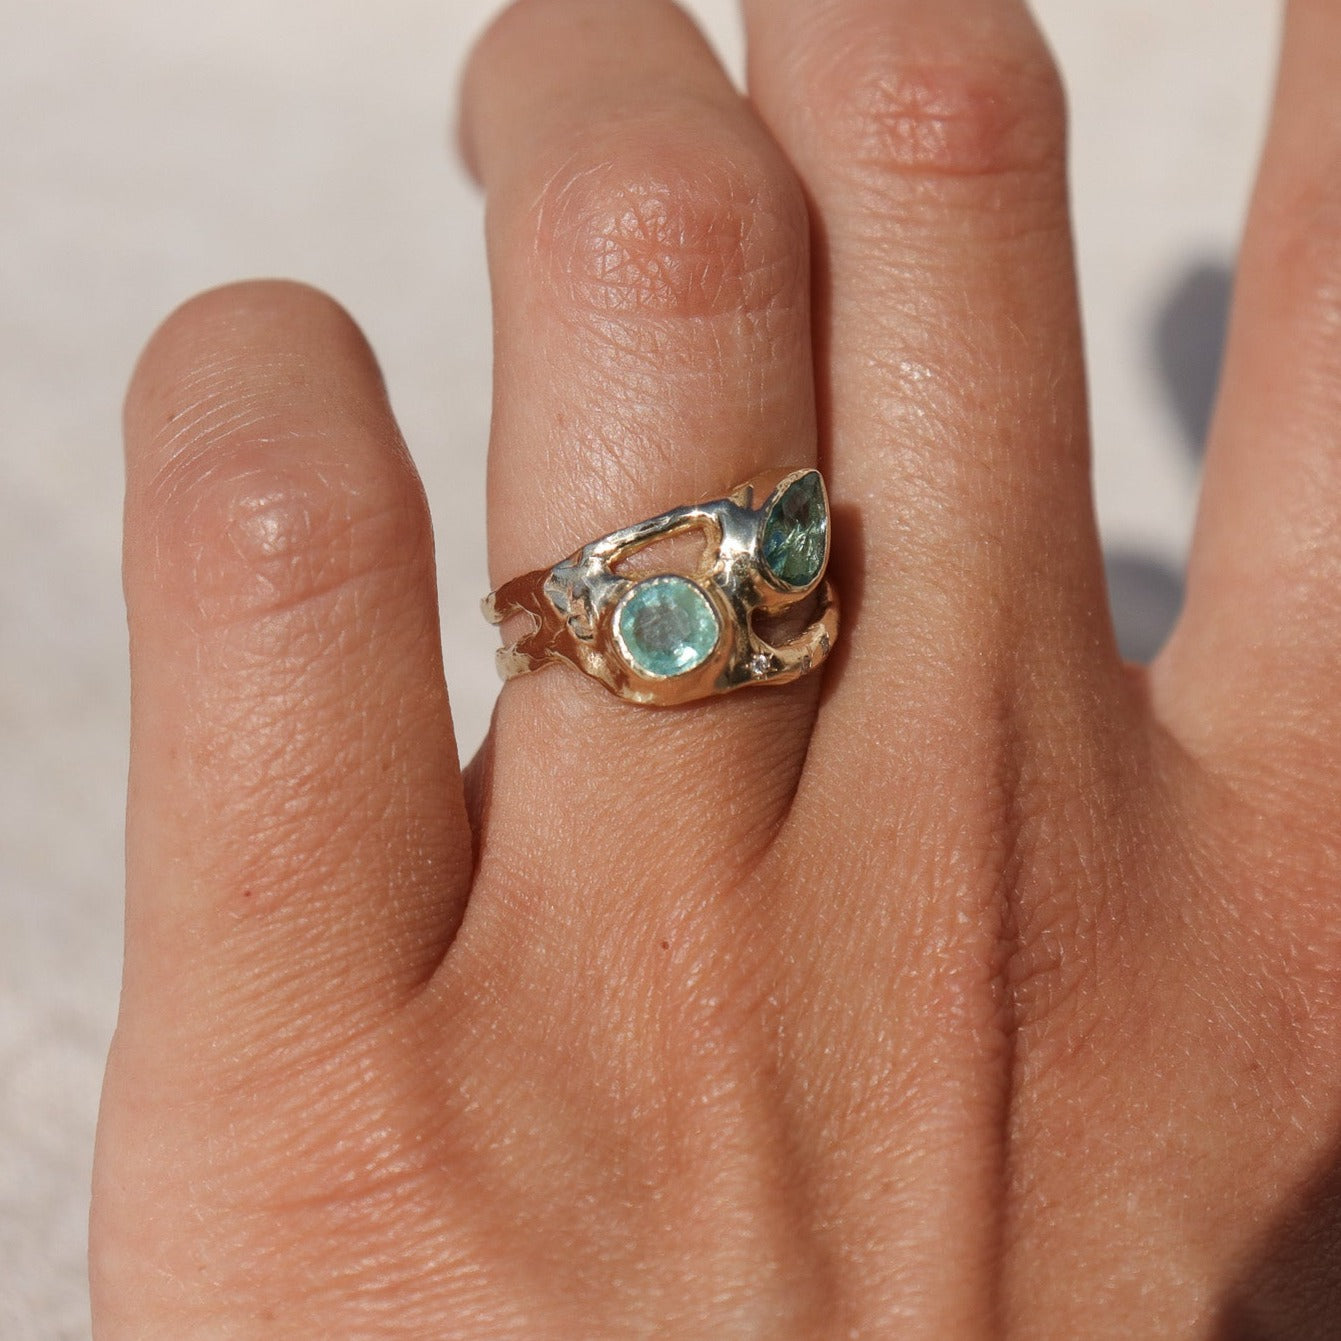 Exquisite ring featuring two vibrant Paraiba tourmalines elegantly bezel-set along a wide, organically shaped band worn on a finger and shown from the side to depict scale and show details.